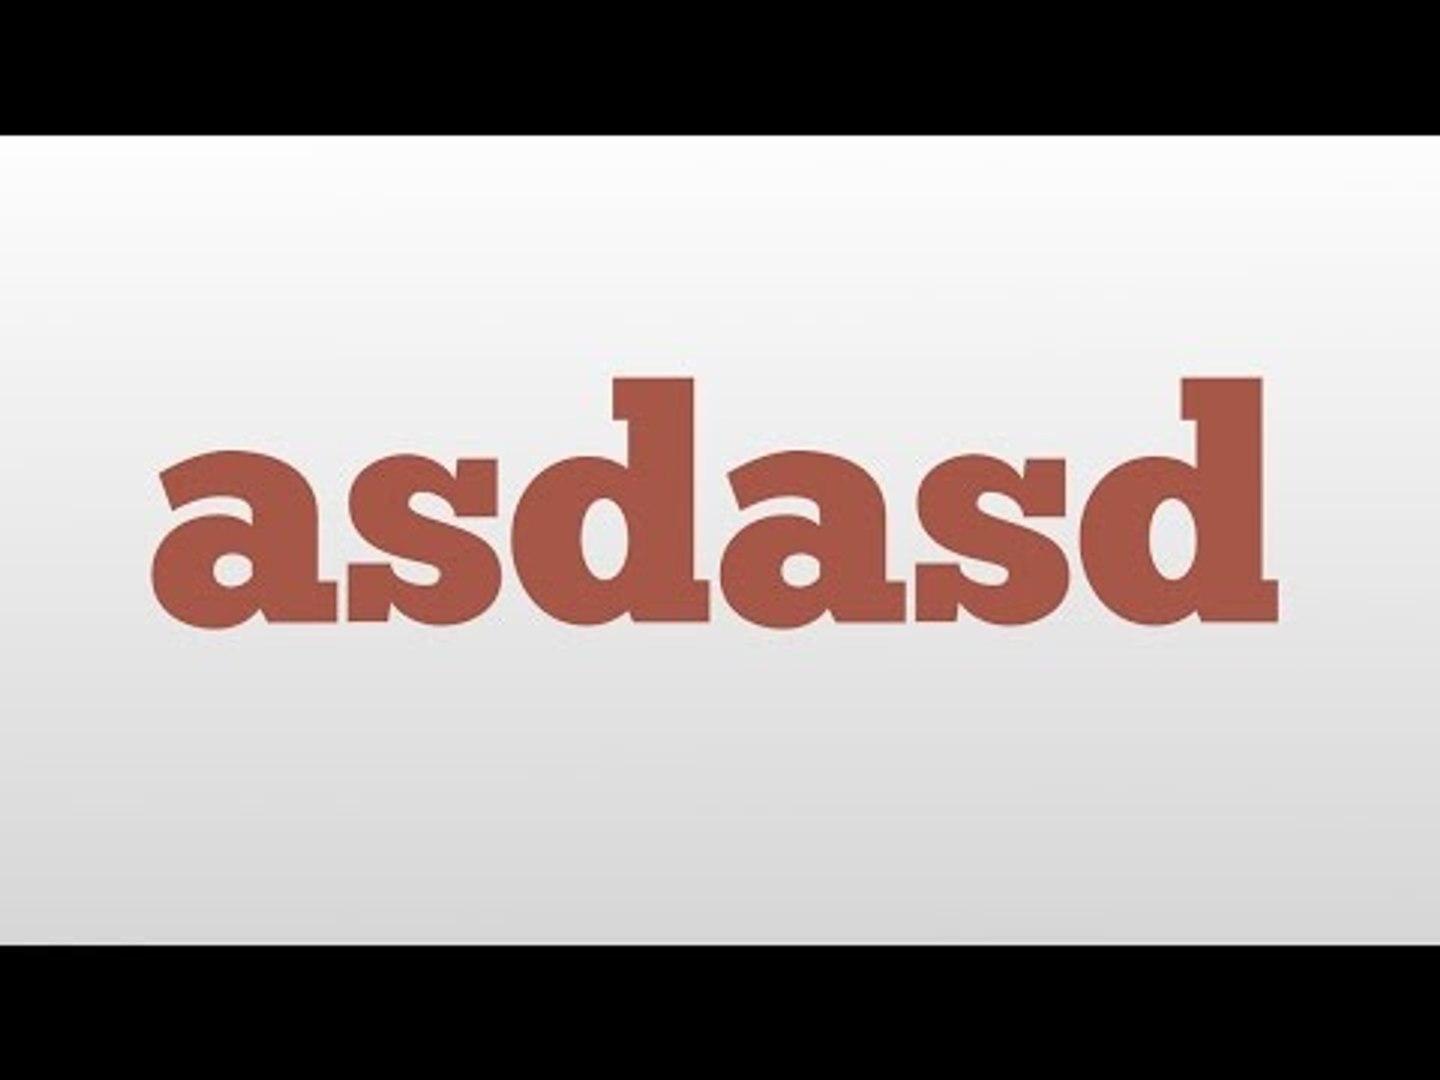 asdasd meaning and pronunciation - video Dailymotion